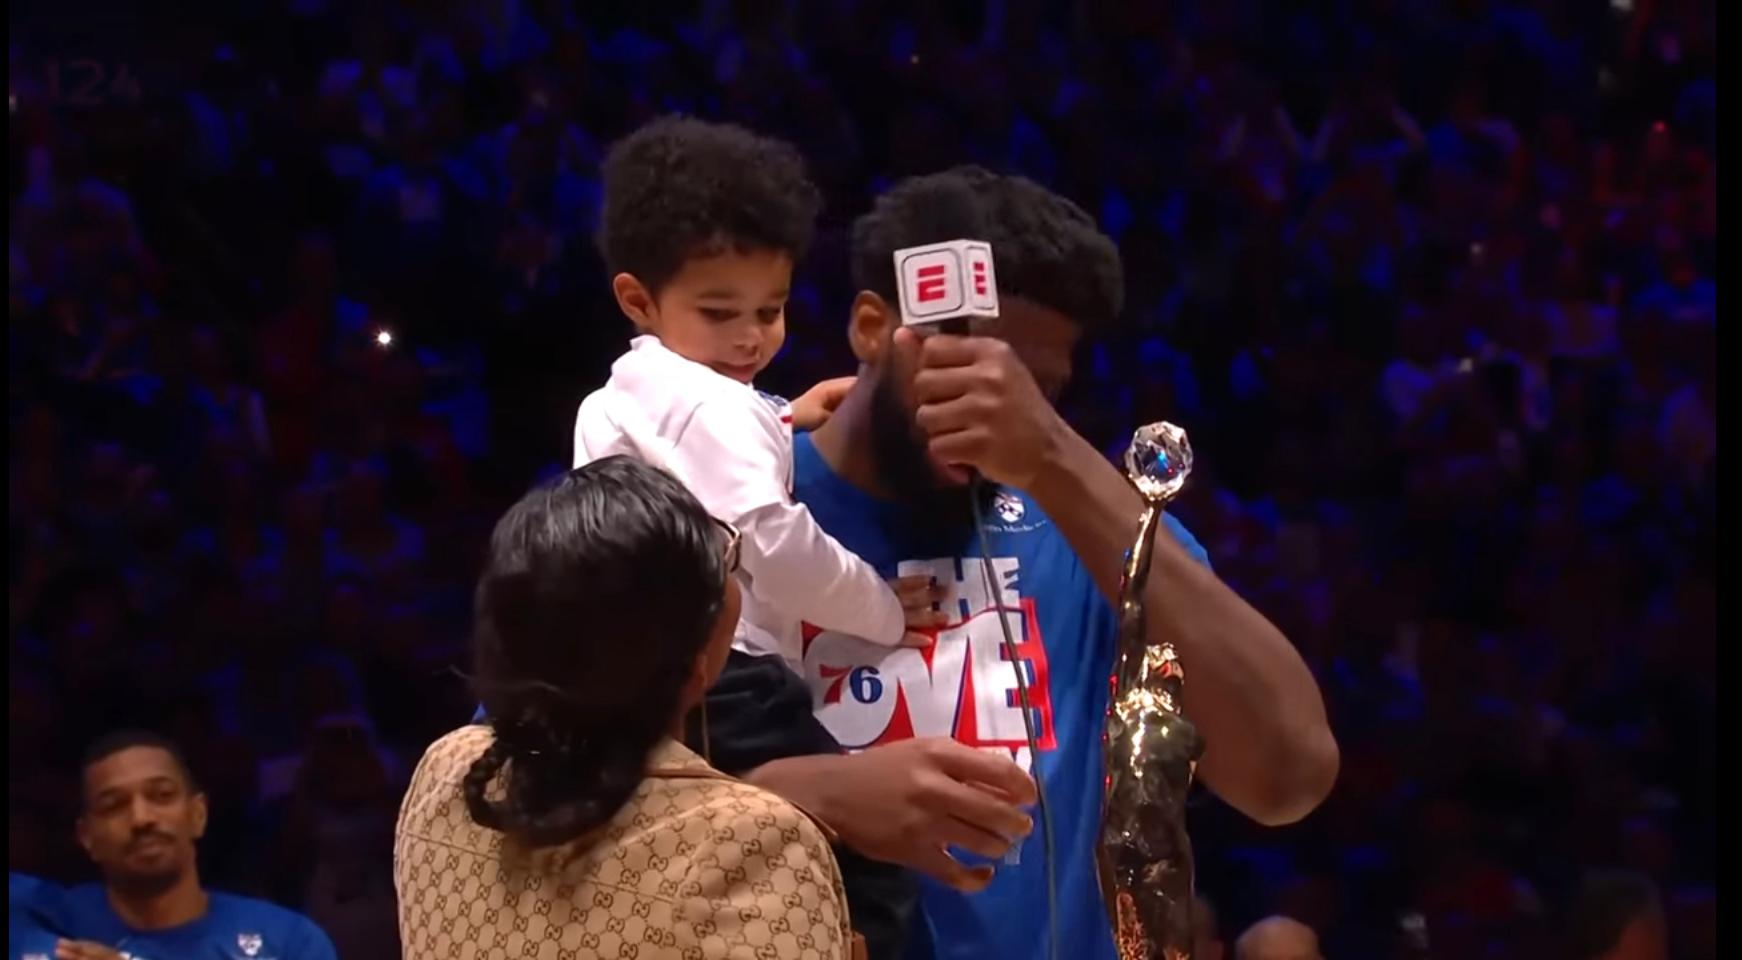 Joel Embiid Gets Emotional Seeing His Son During MVP Ceremony